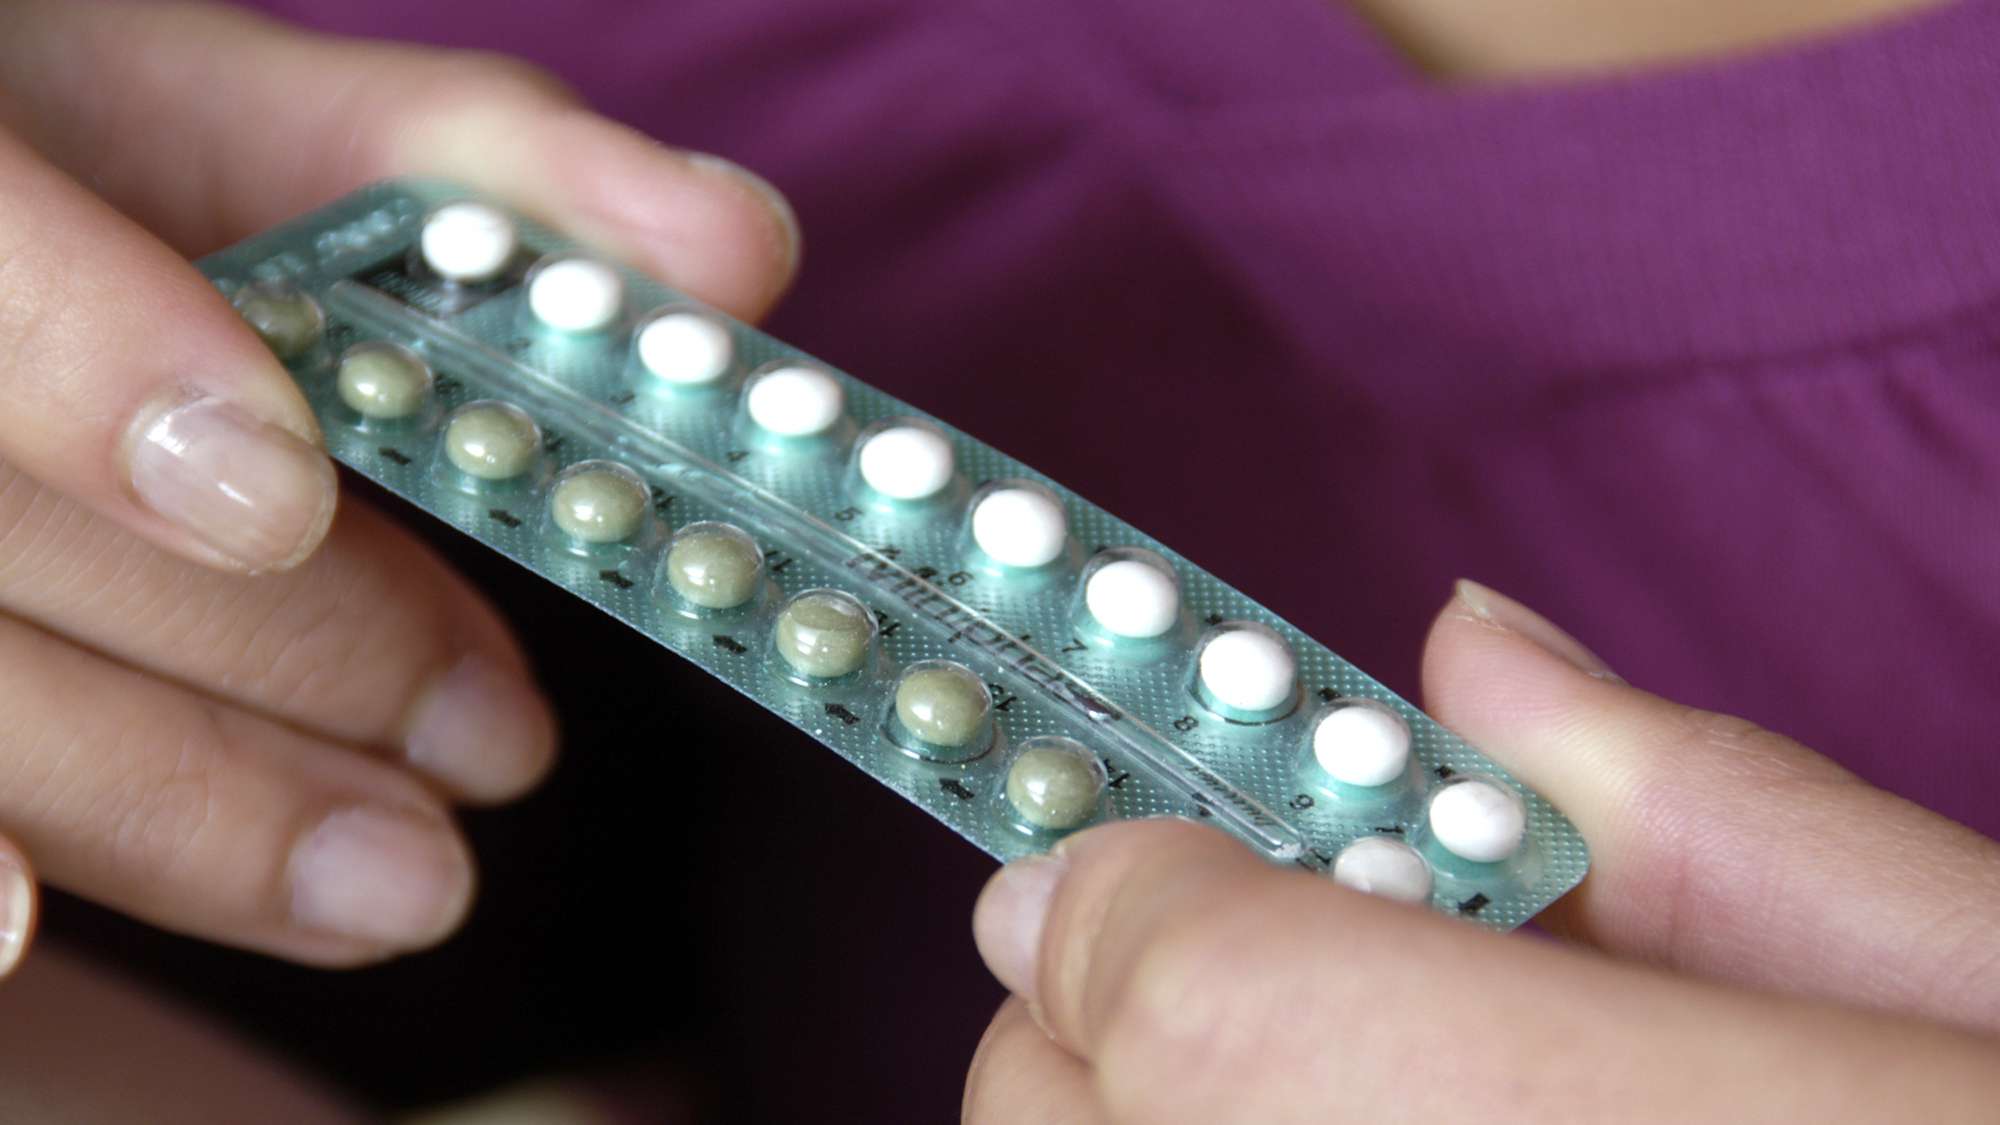 Does some birth control raise depression risk? That